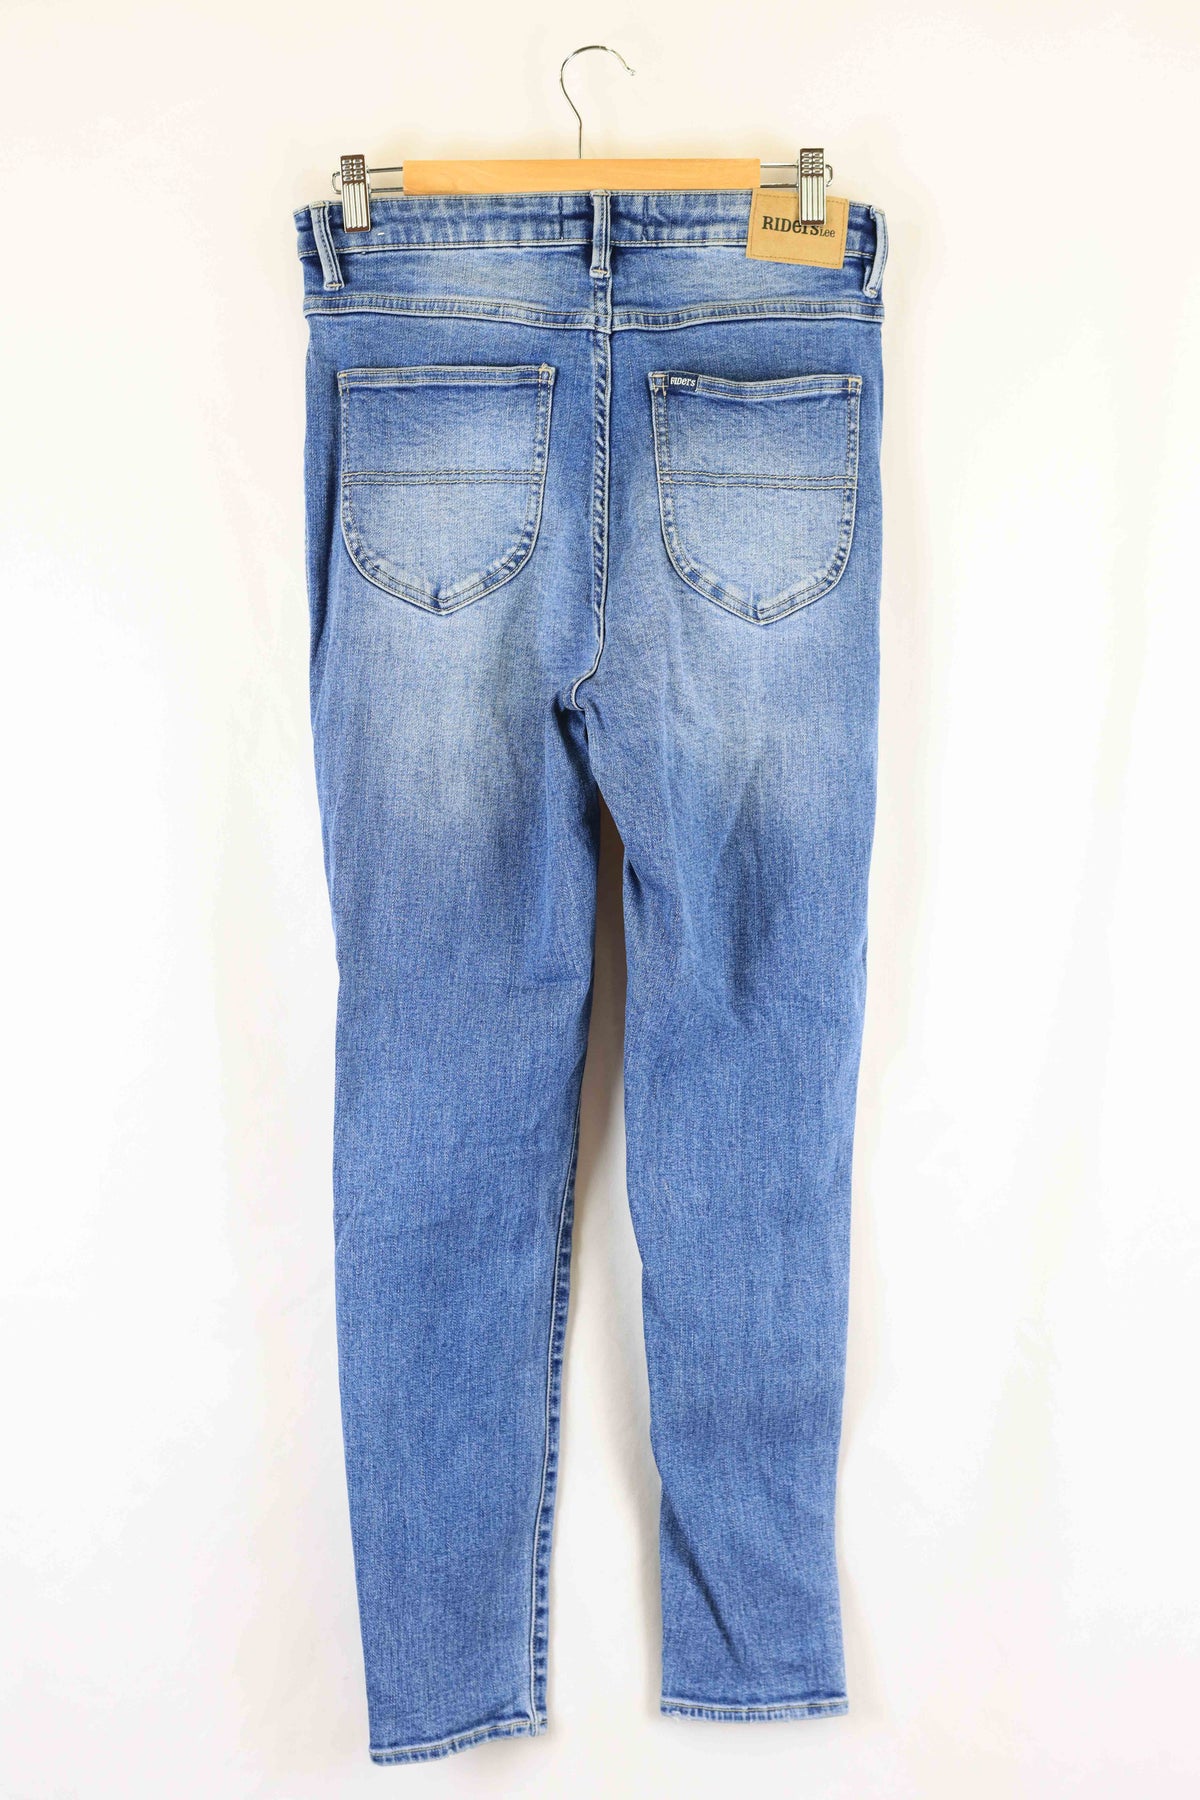 Riders Blue Jeans 12